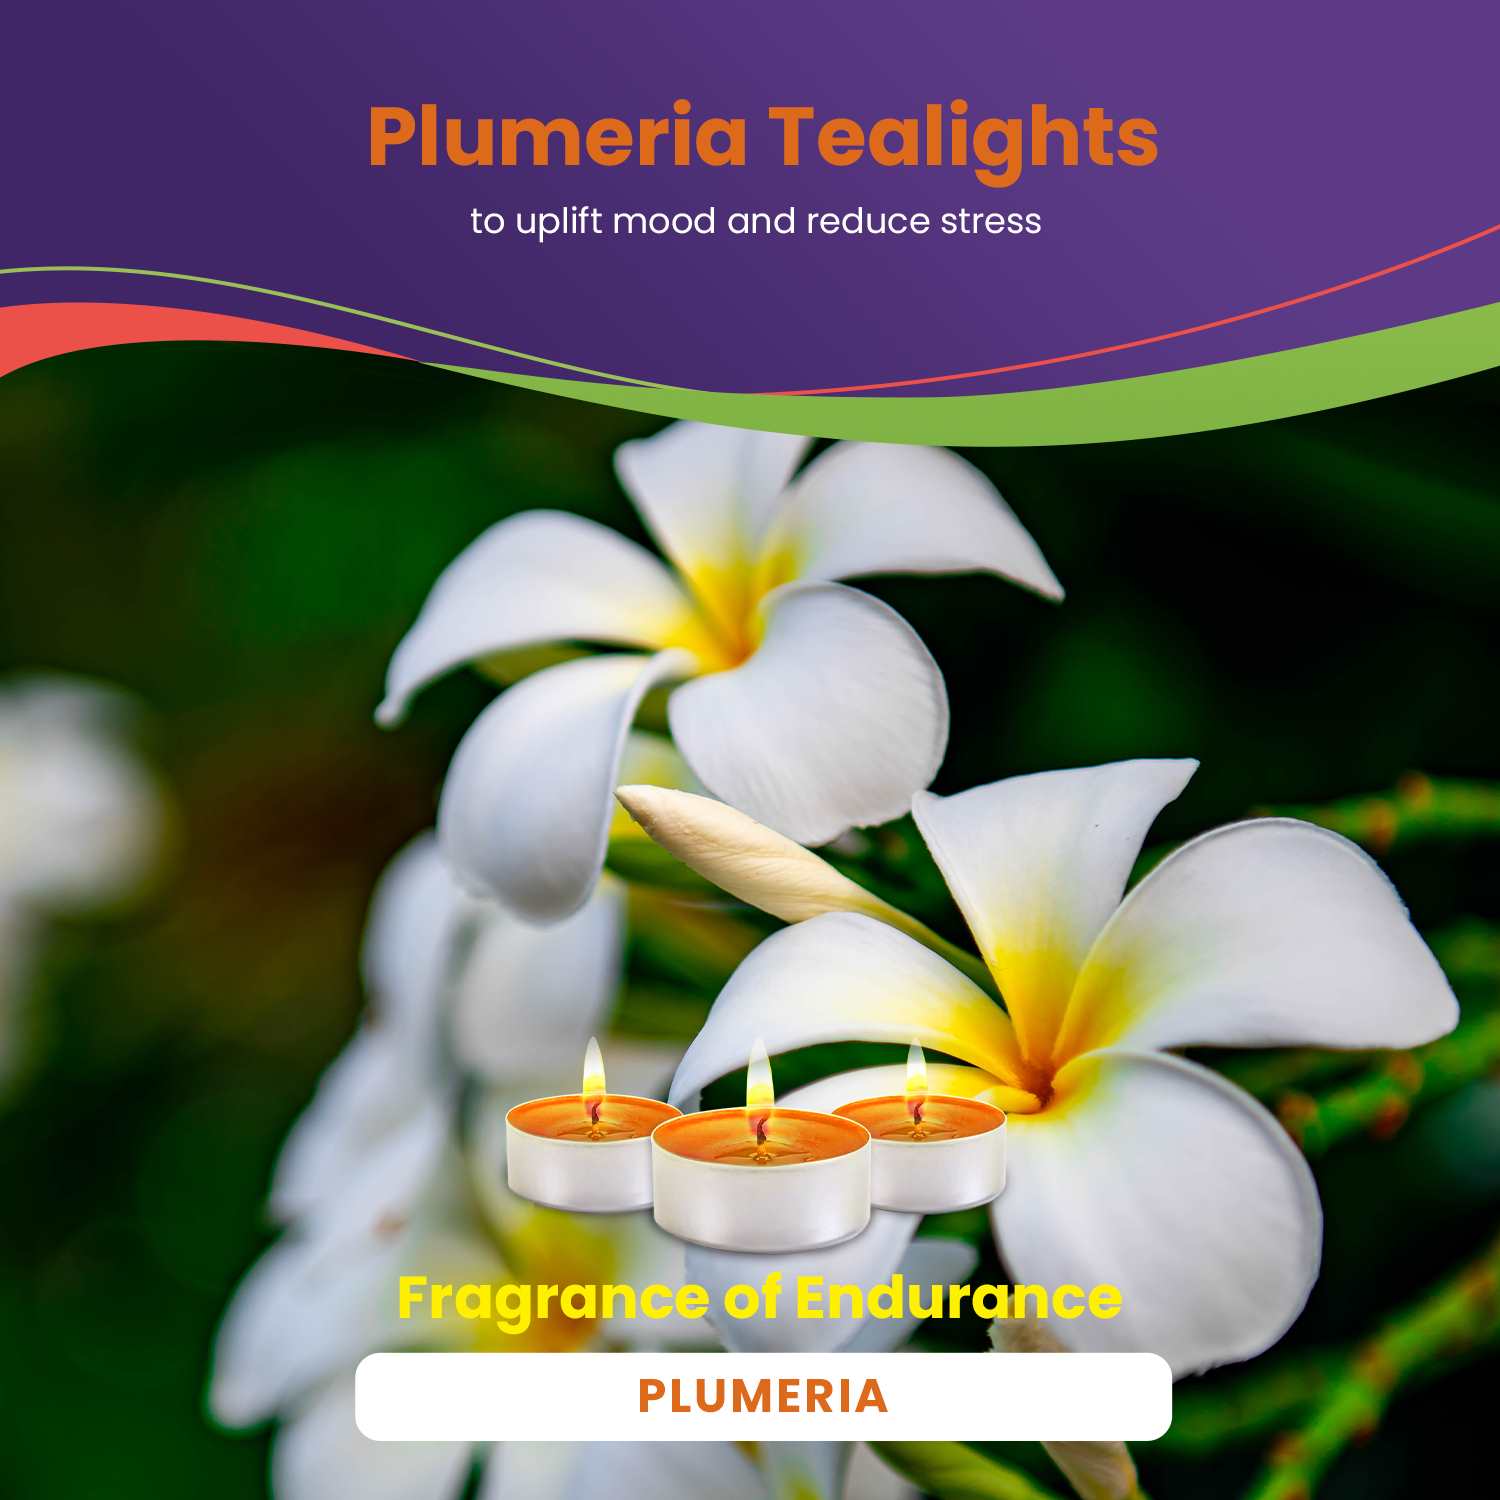 Plumeria Scented Tealight Candles - 30 Pack